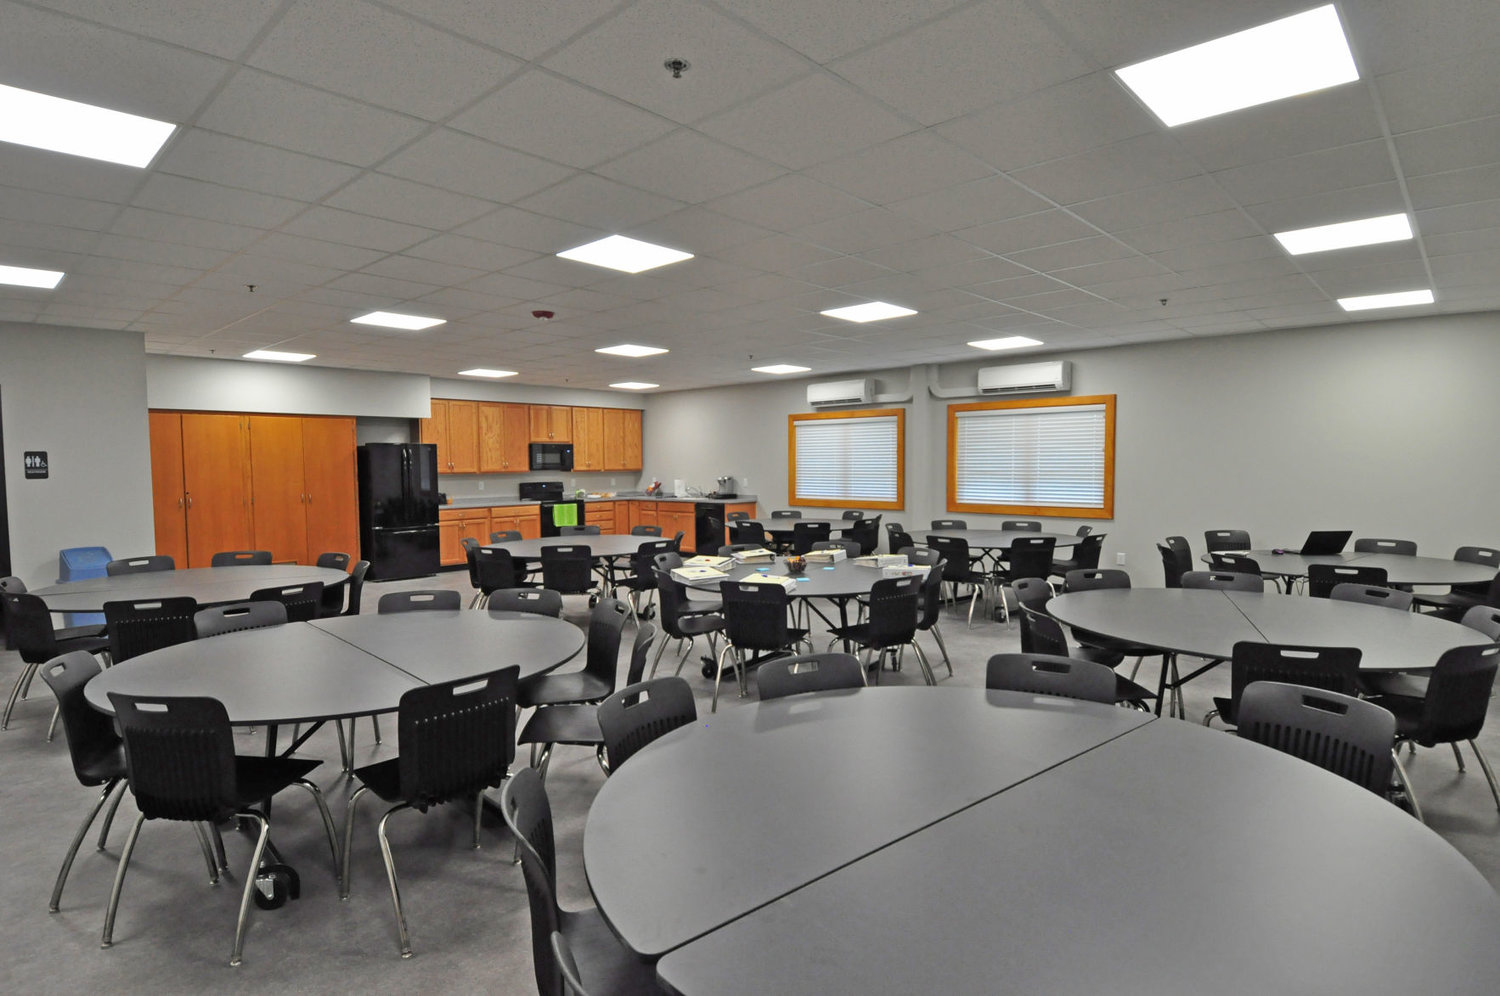 The community room at the Youth Service Bureau will be available for other nonprofit groups in the community to use.